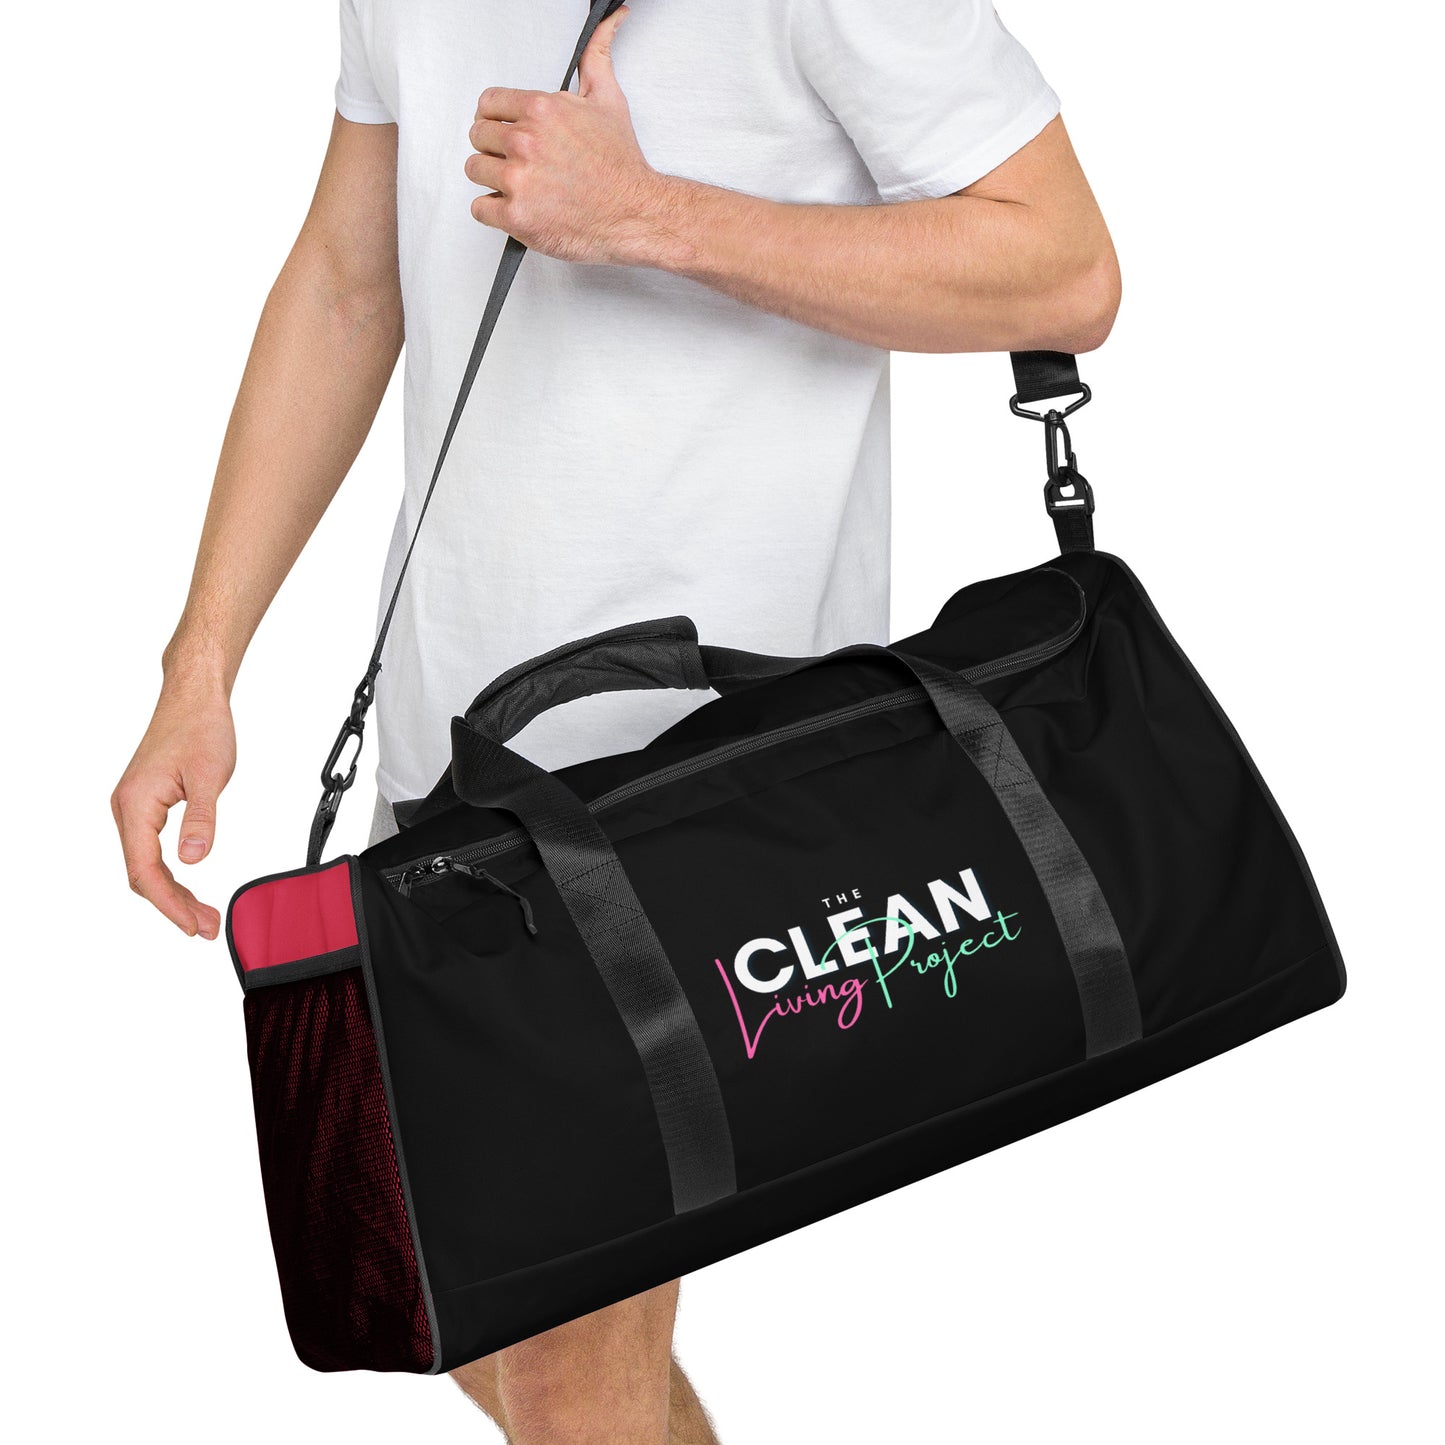 The Clean Living Project Duffle Bag (black)